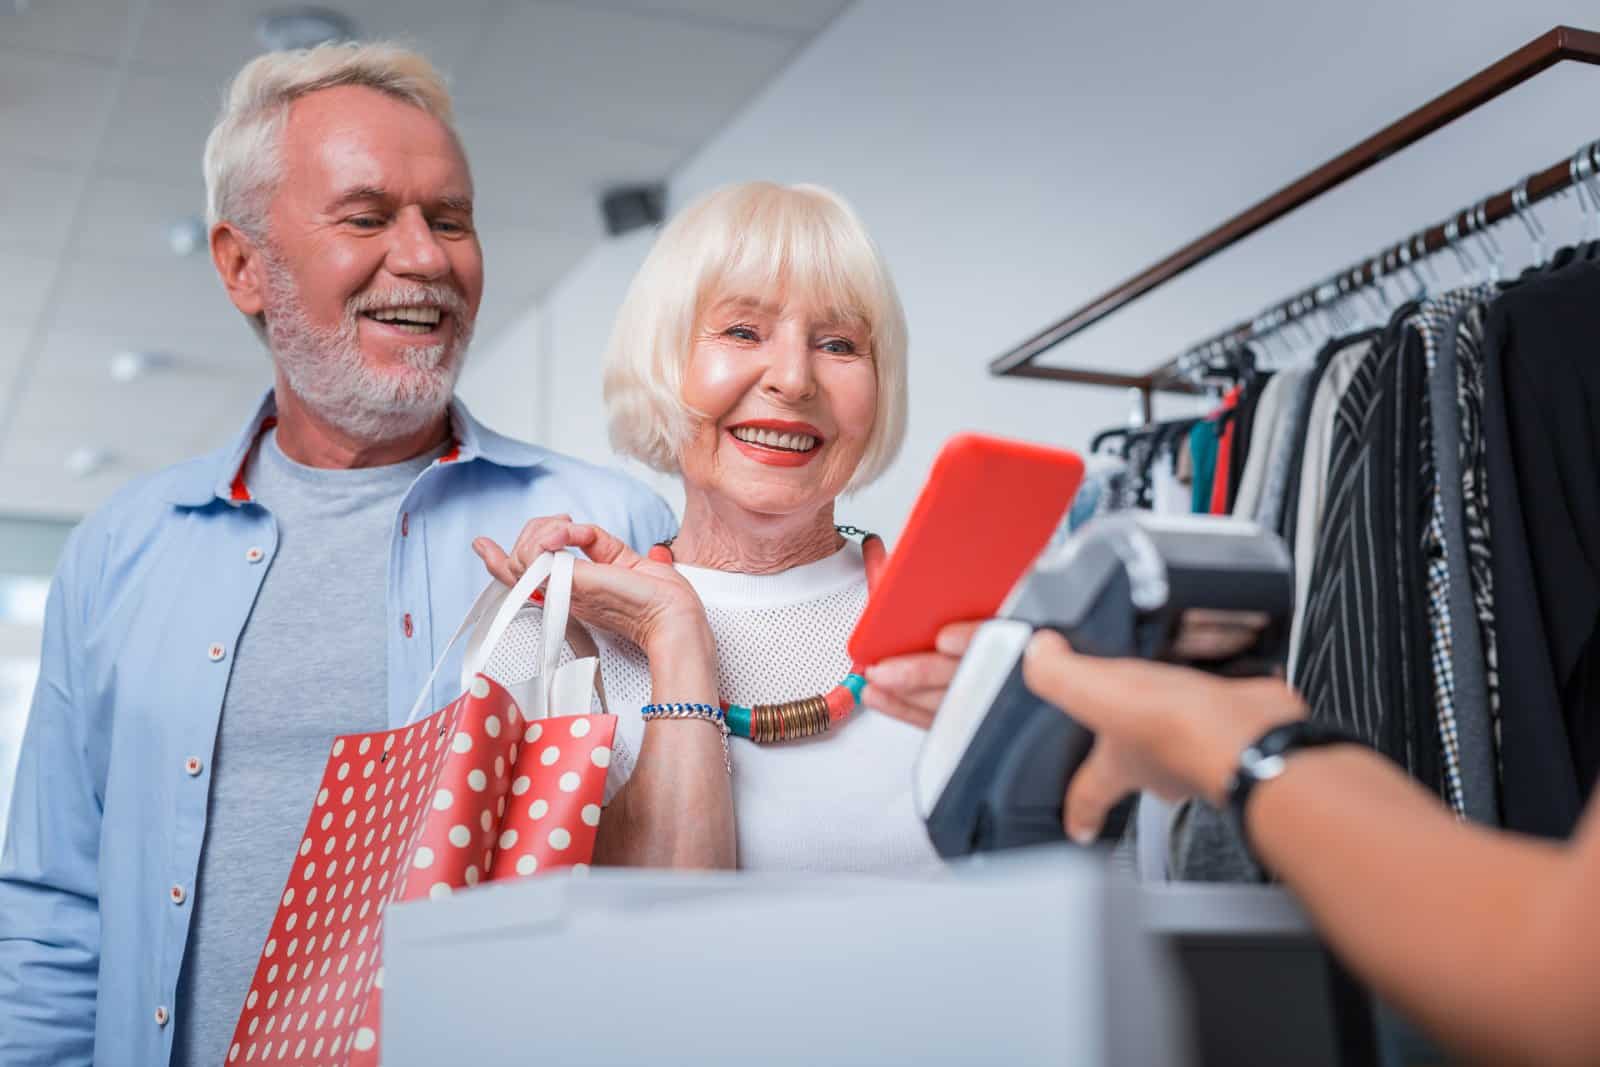 <p class="wp-caption-text">Image Credit: Shutterstock / Dmytro Zinkevych</p>  <p><span>Moving north to Tennessee, another popular retirement destination, estimated annual retirement expenses range from $45,000 to $55,000. </span></p> <p><span>The median home price is around $250,000, with healthcare costs averaging between $6,000 and $7,000 per year.</span></p>